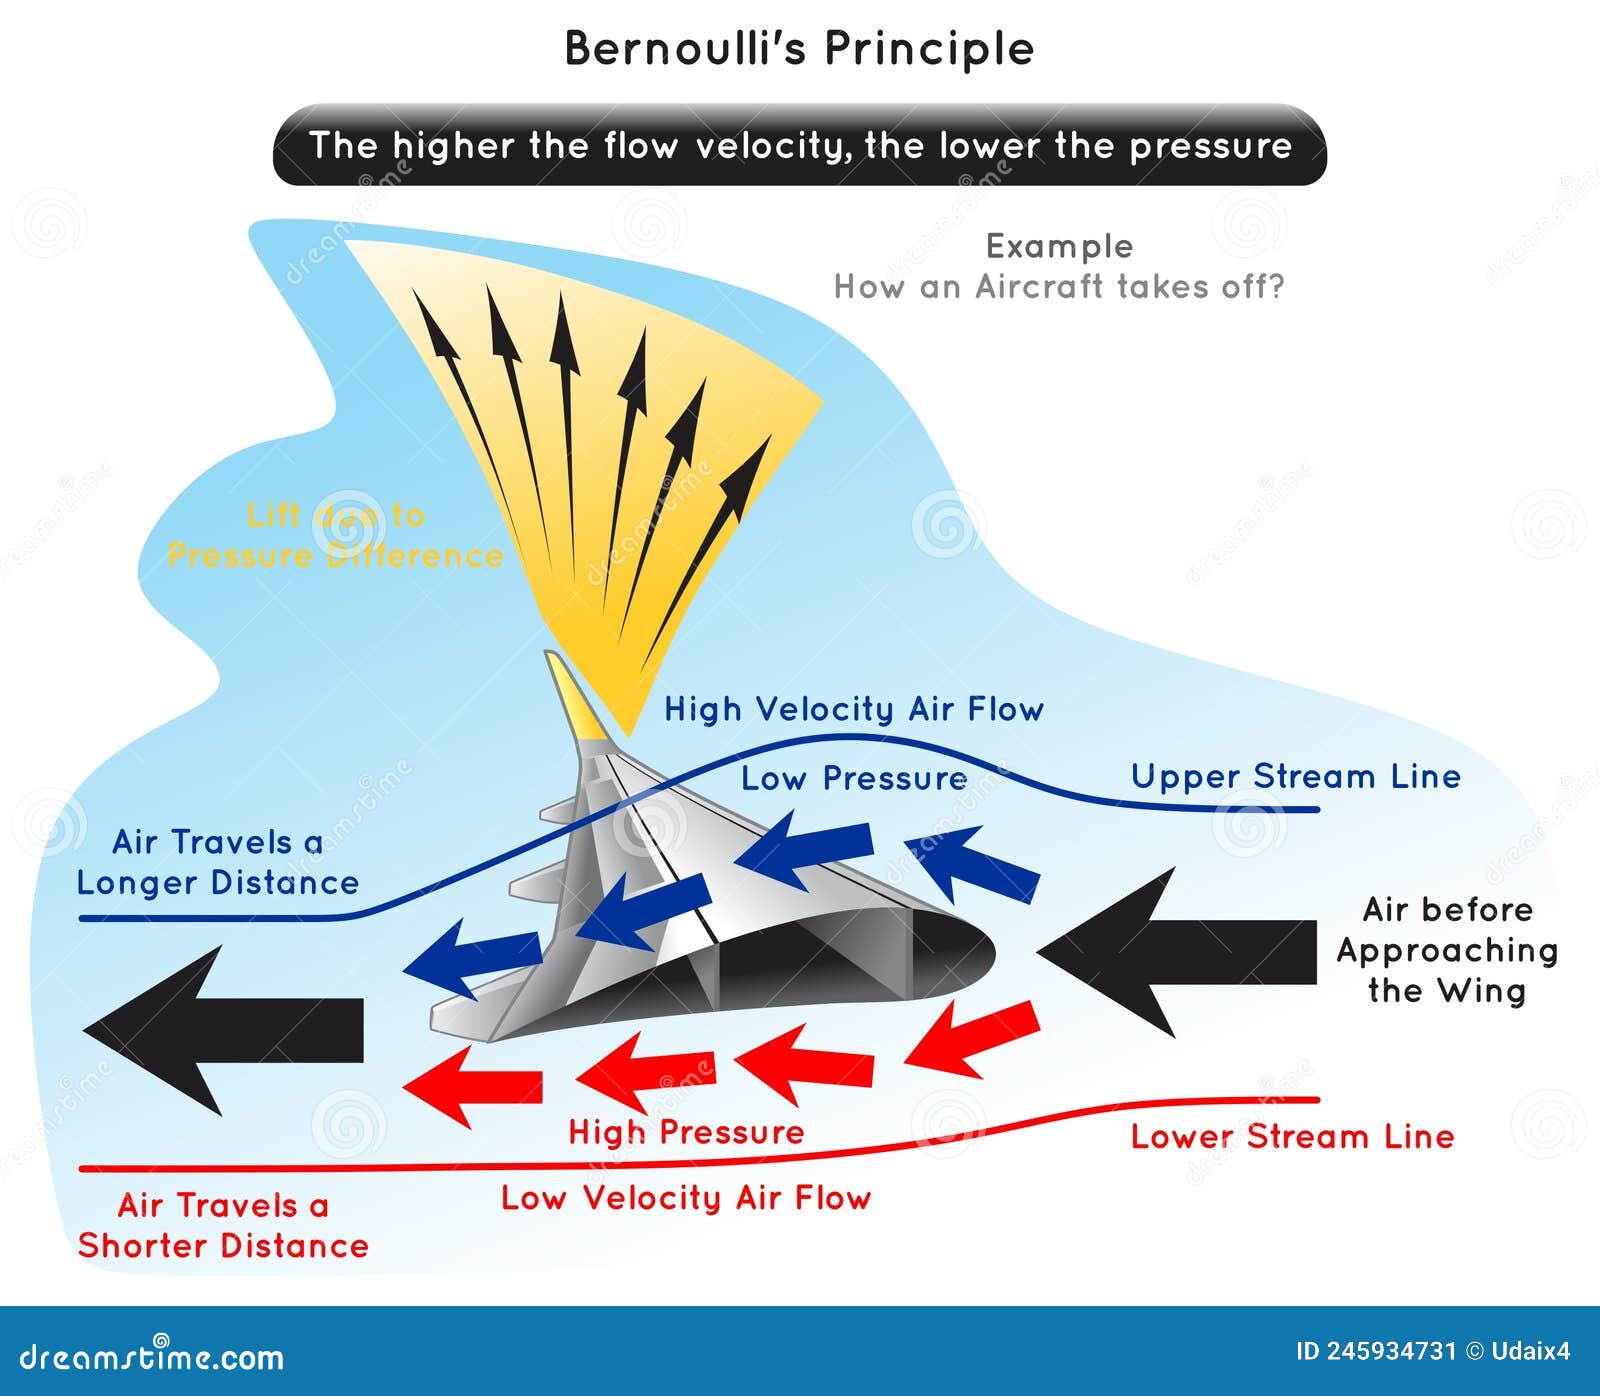 bernoulli principle infographic diagram with example